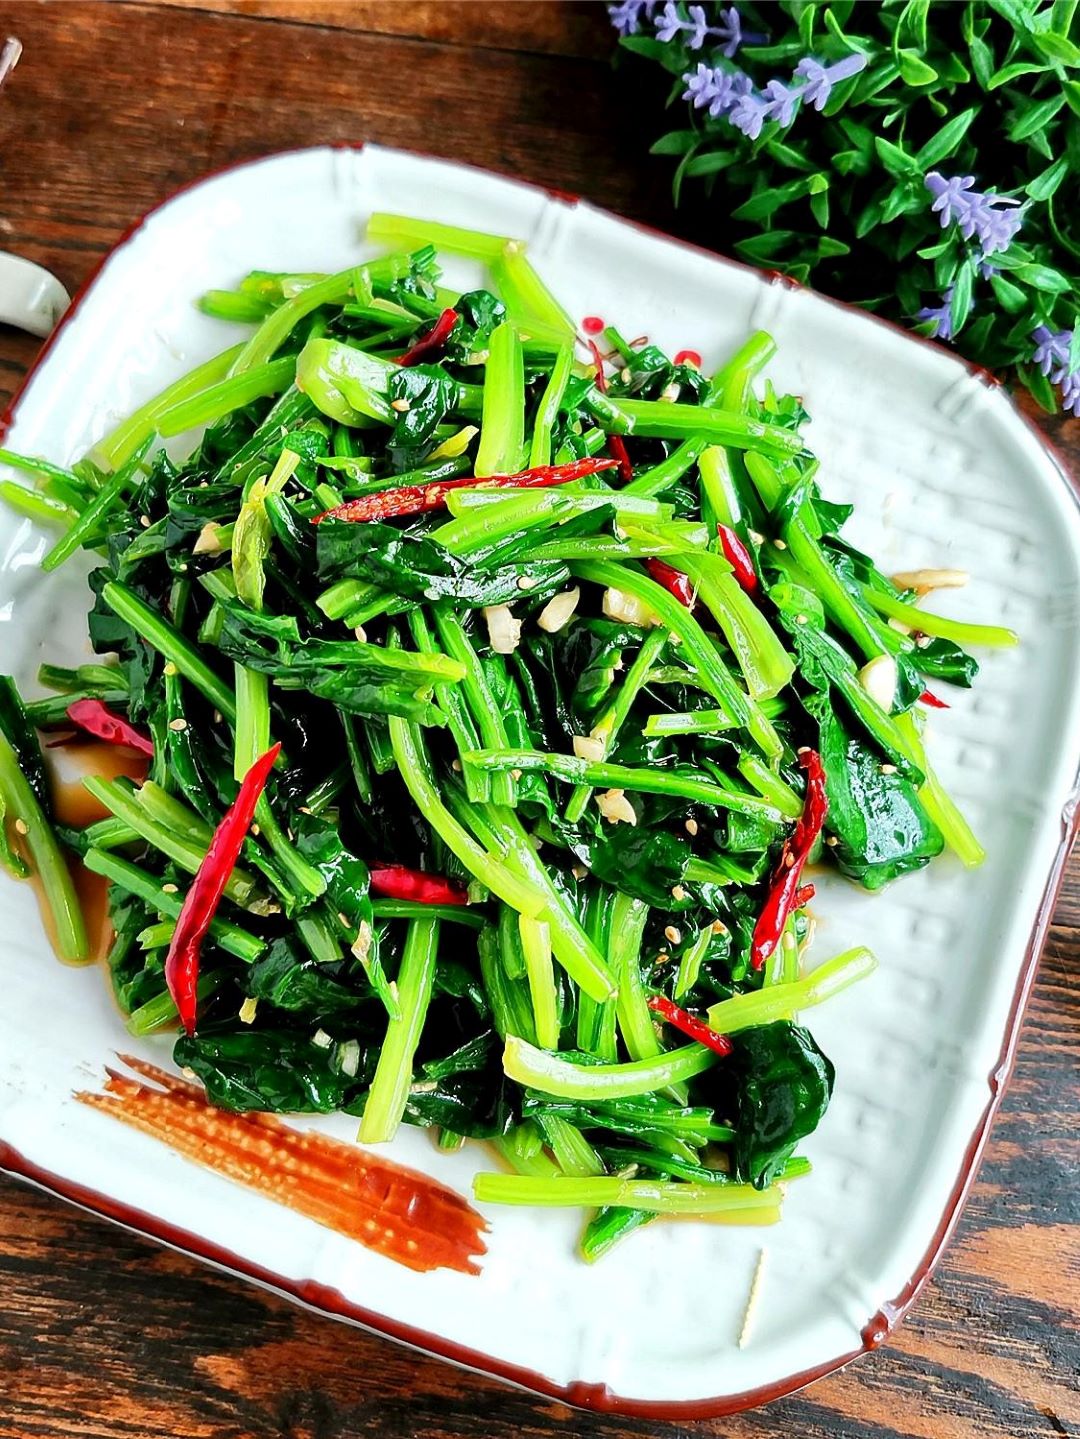 Chinese Spinach Salad Healthy Vegetarian Cold Dish